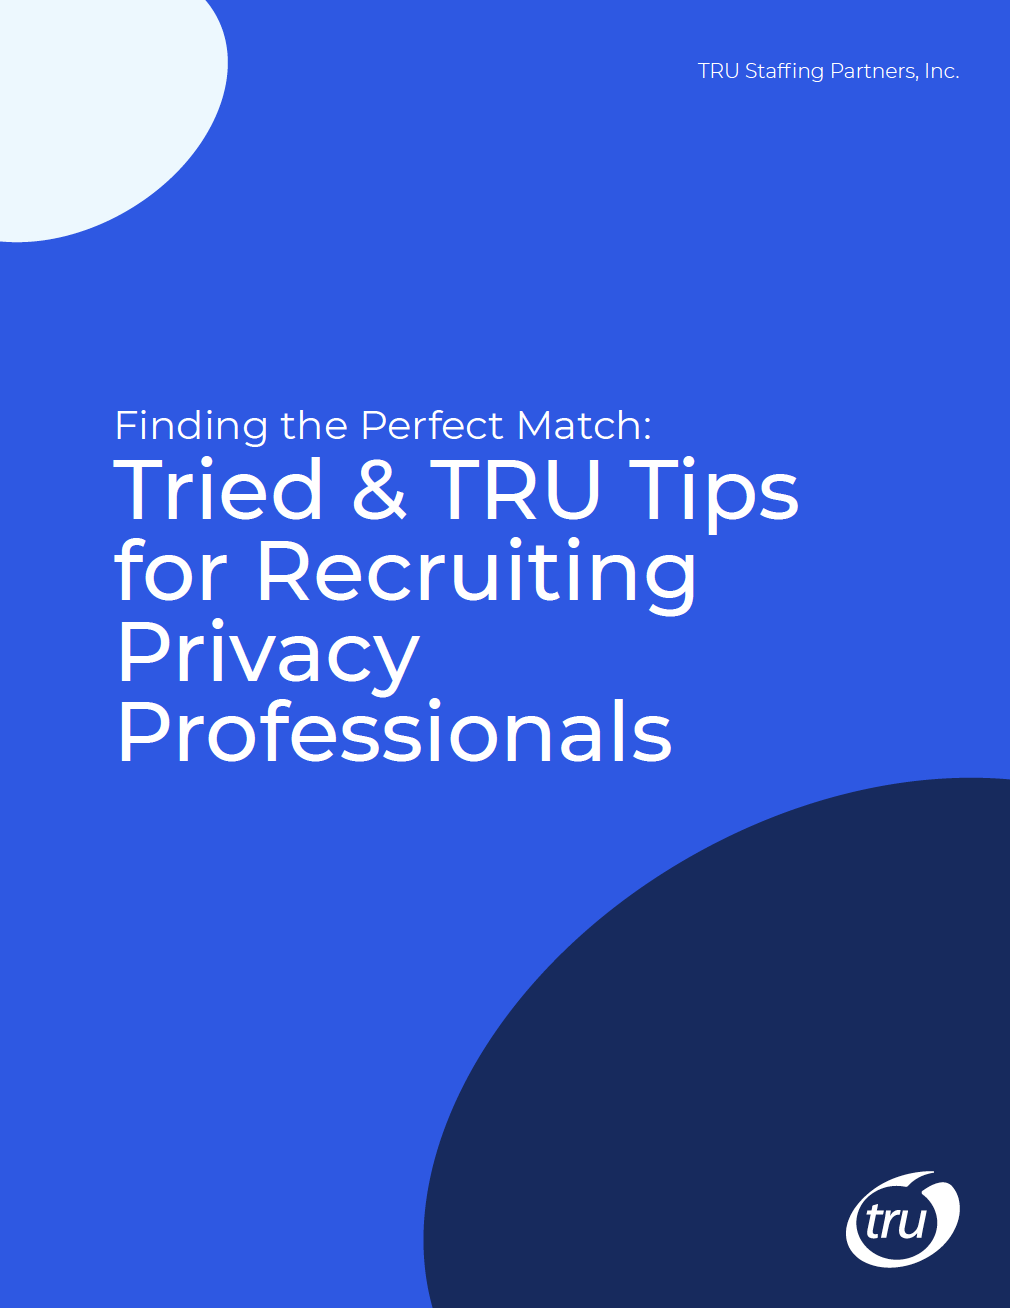 Tried & TRU Tips for Recruiting Privacy Professionals